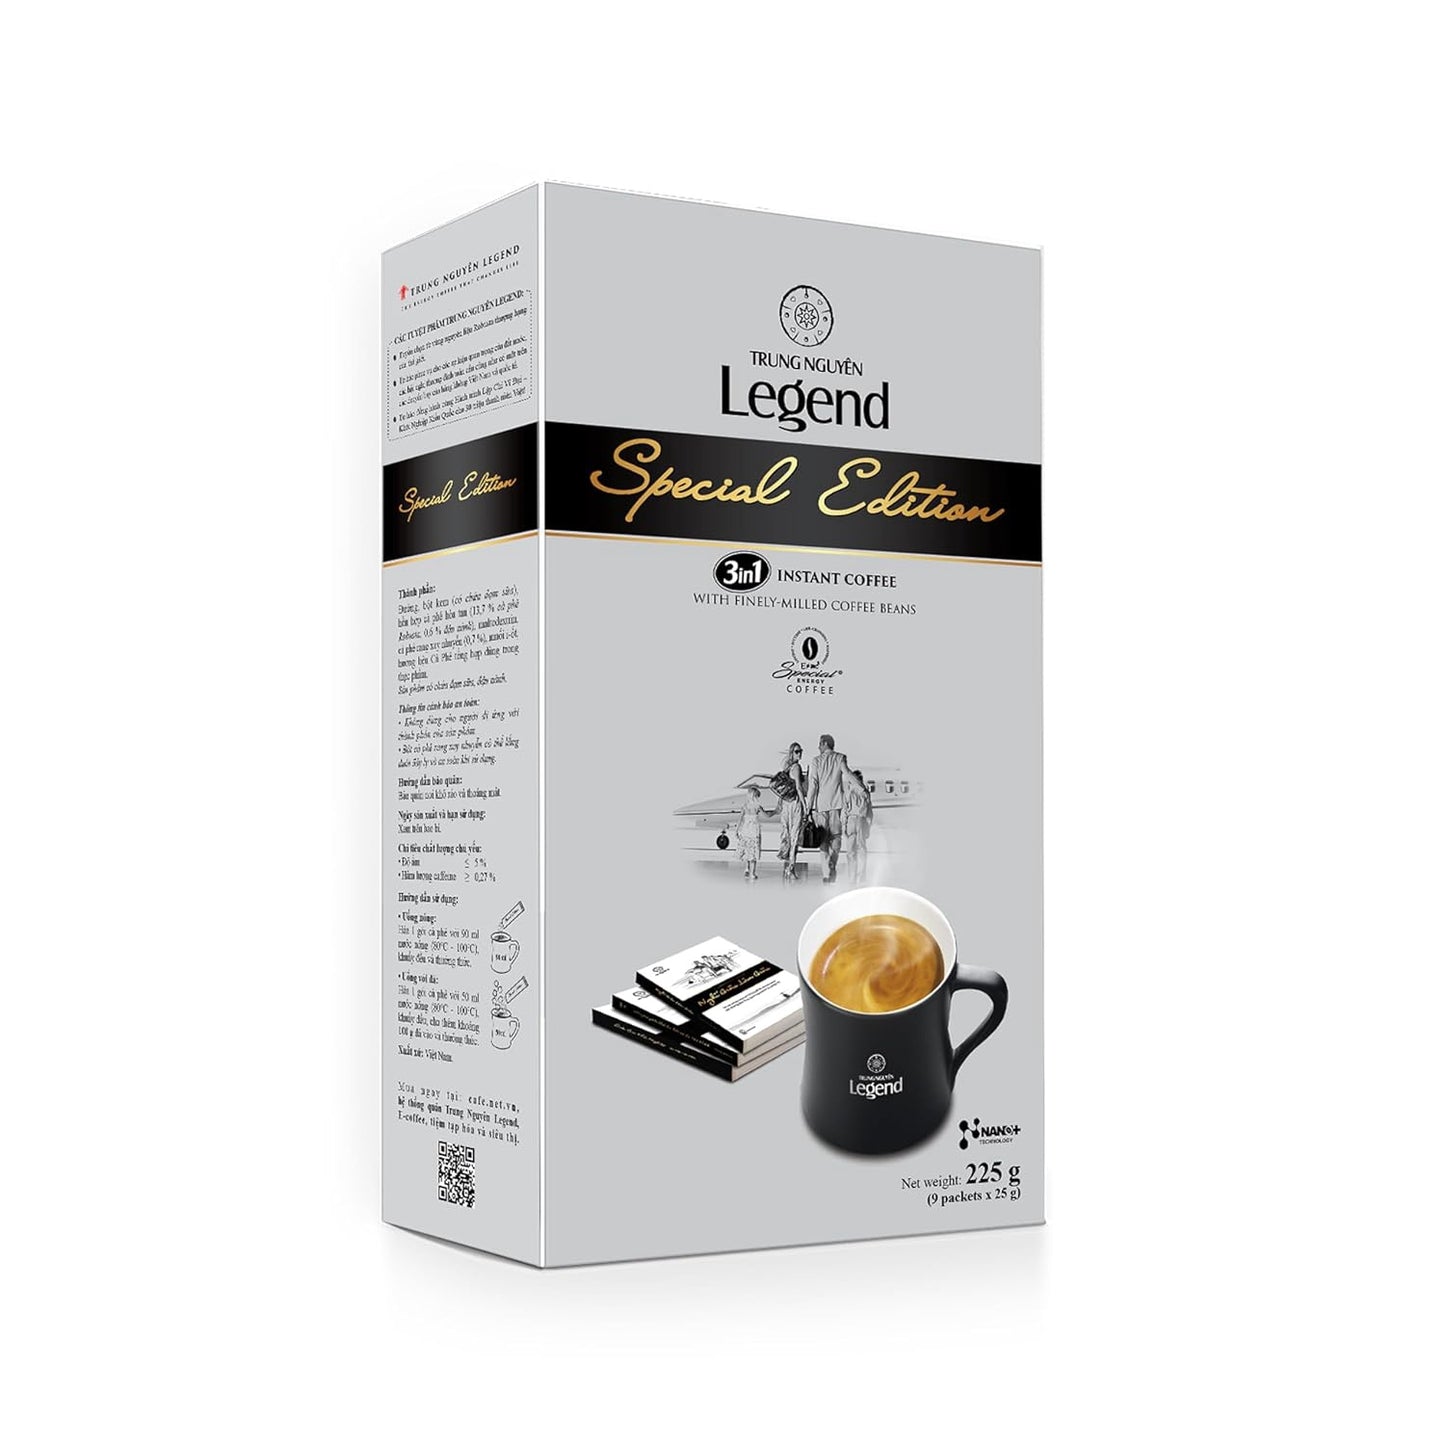 Trung Nguyen Legend Special Edition Instant Coffee 即溶咖啡 (25gx18) x1